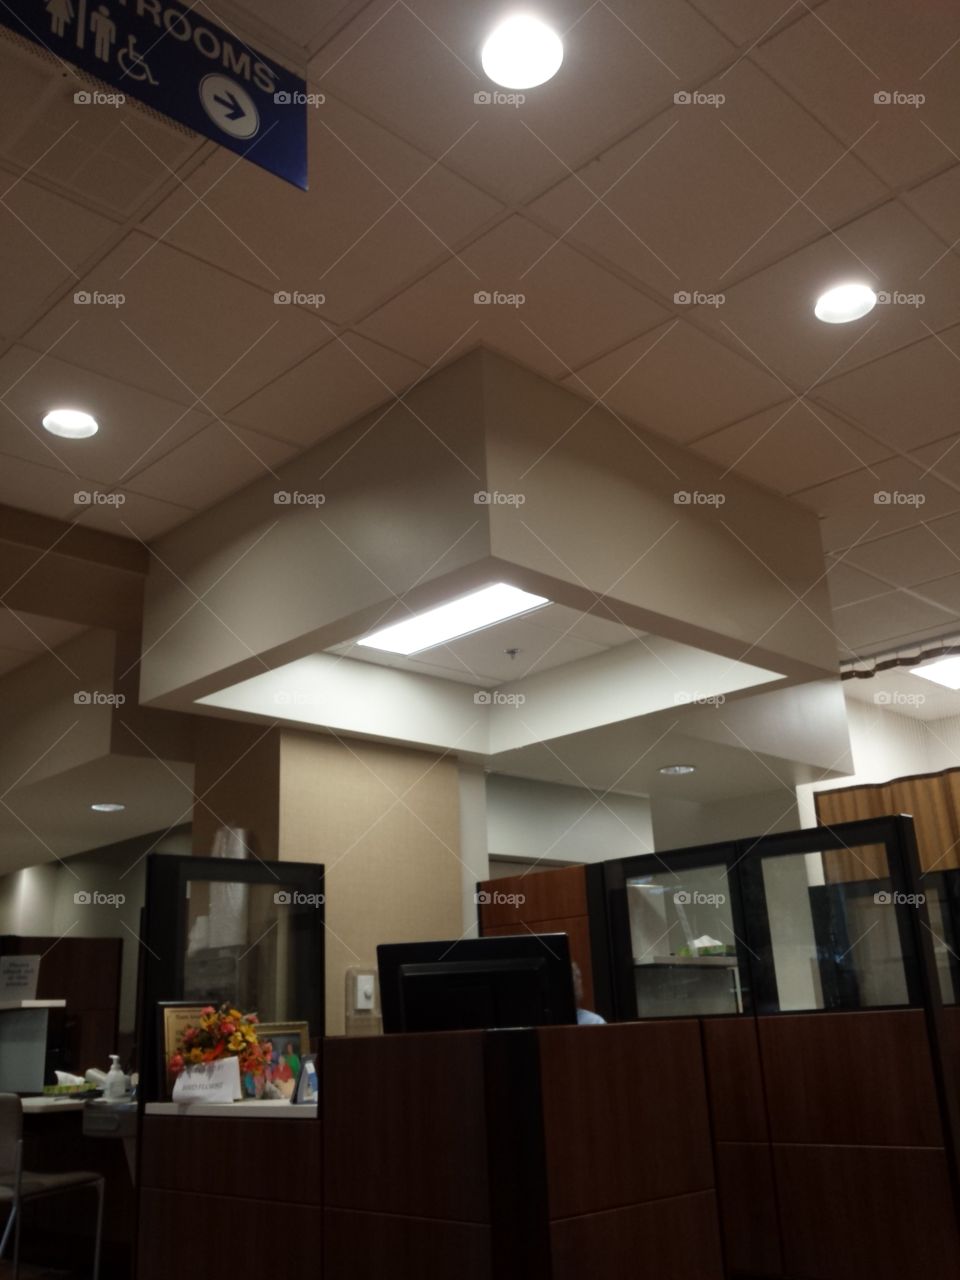 Light fixture in a doctor's office.